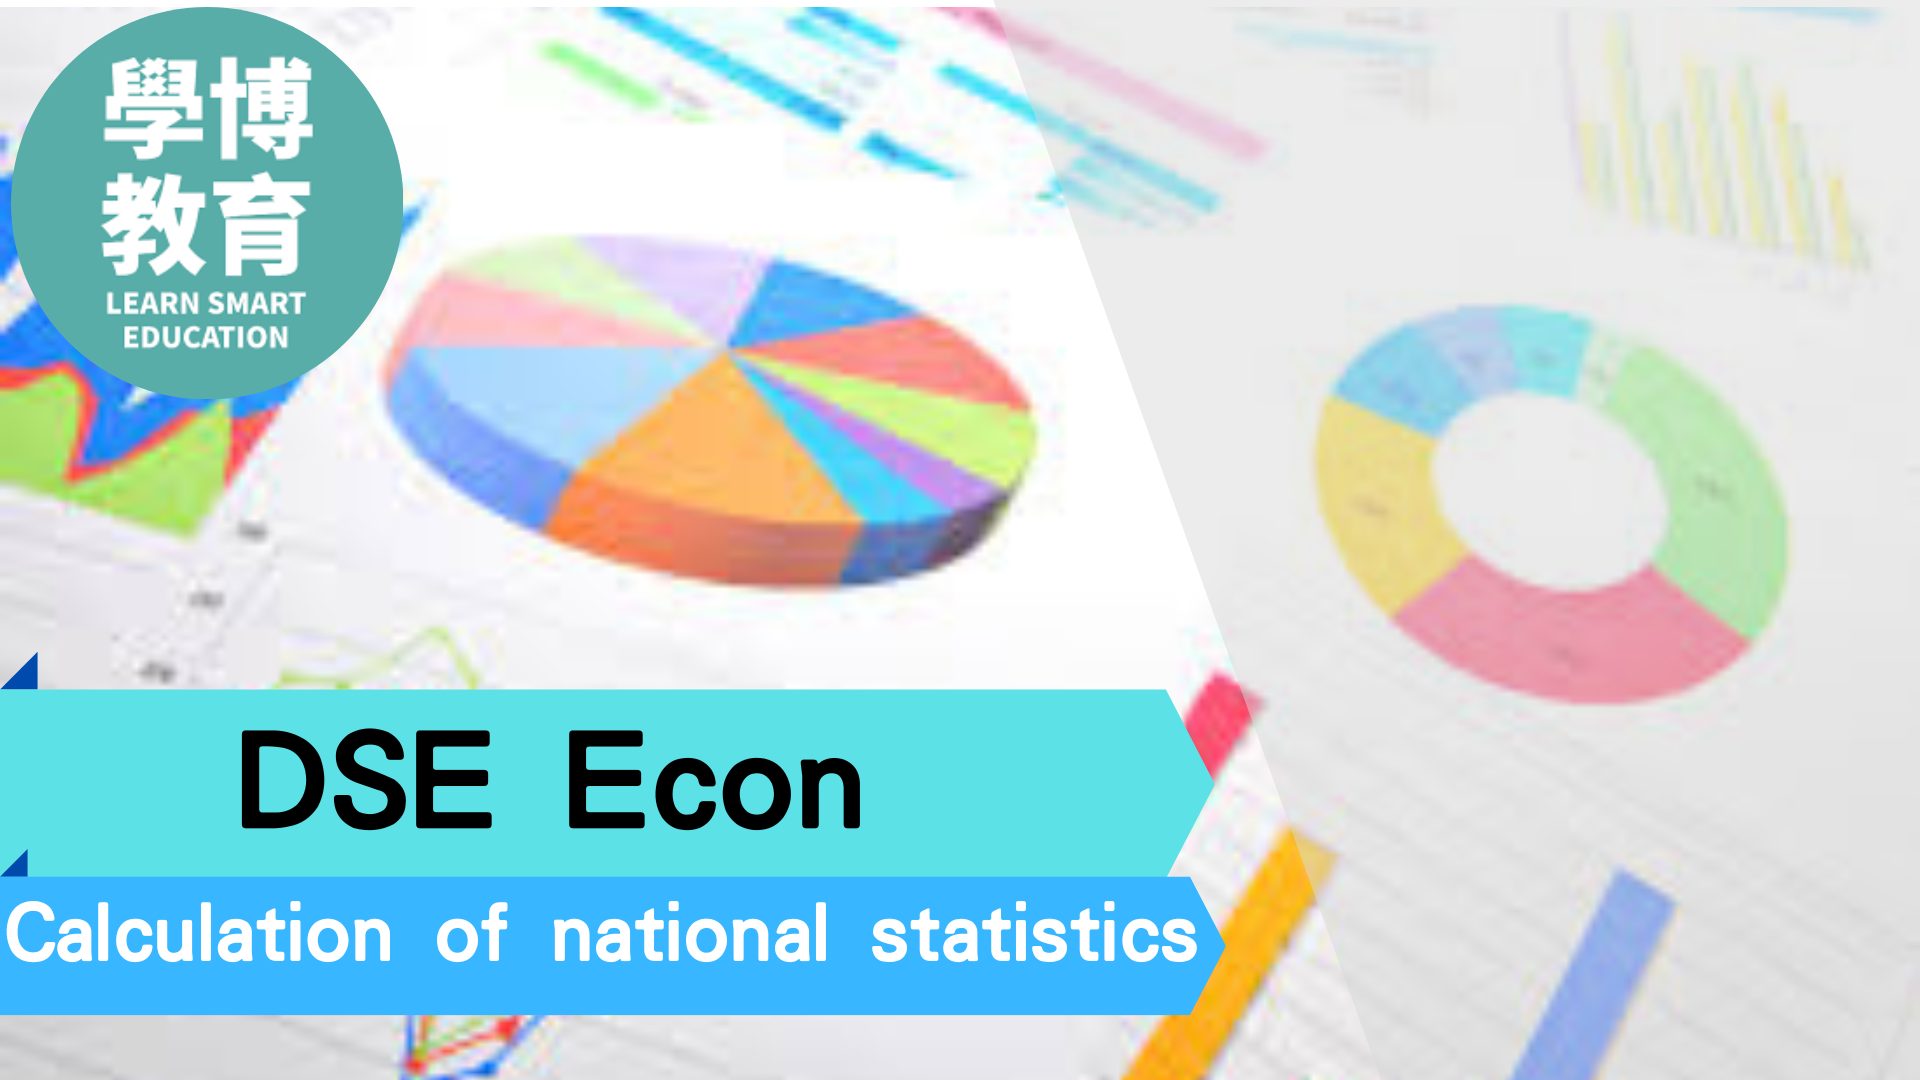 calcultion of national statistics dse